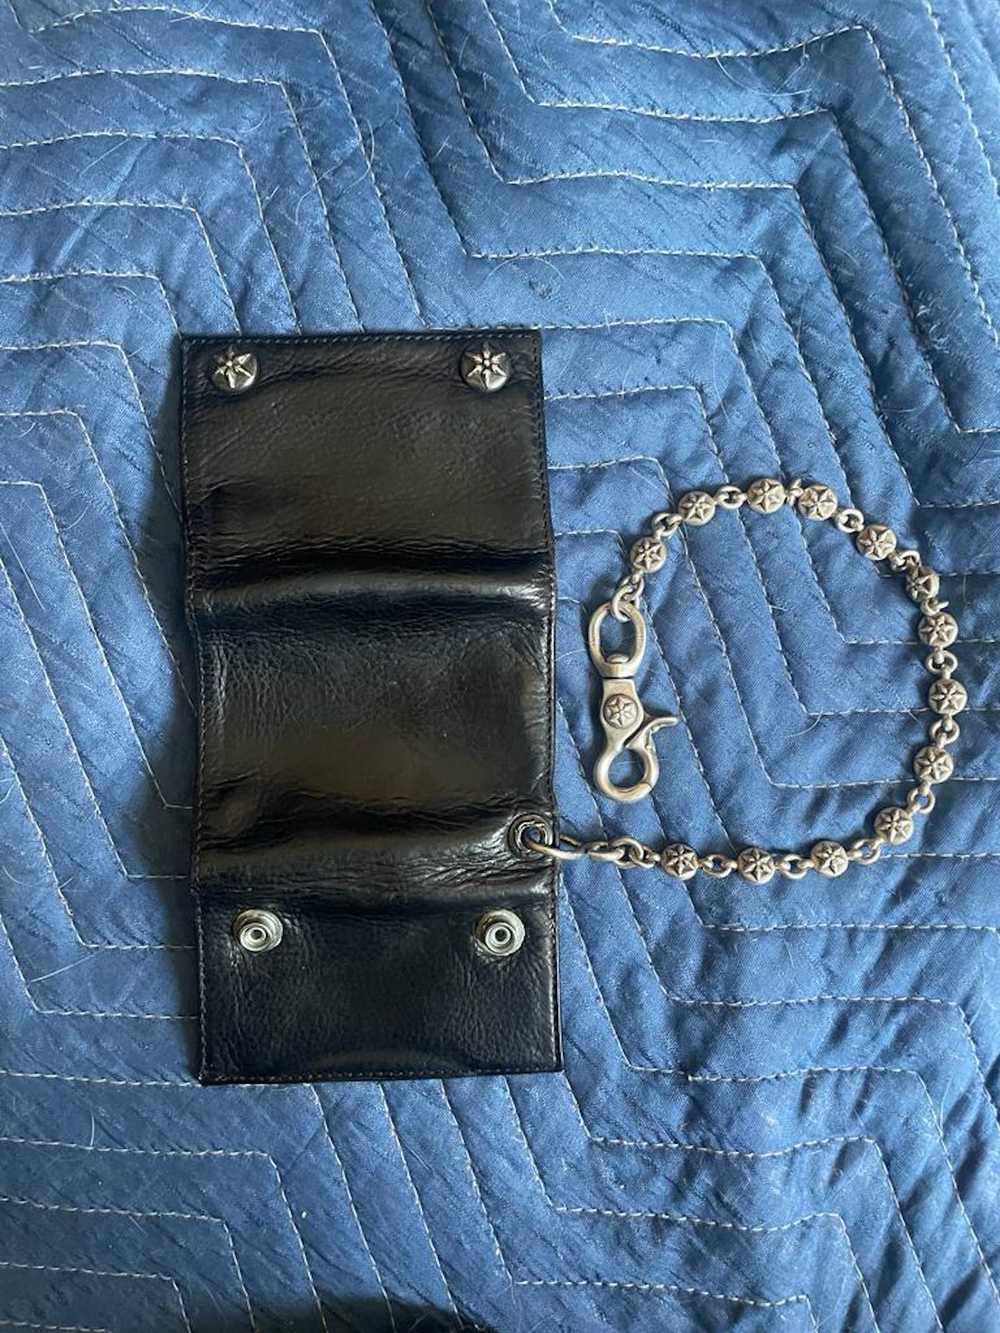 Chrome Hearts Chrome Hearts Ball chain with wallet - image 2